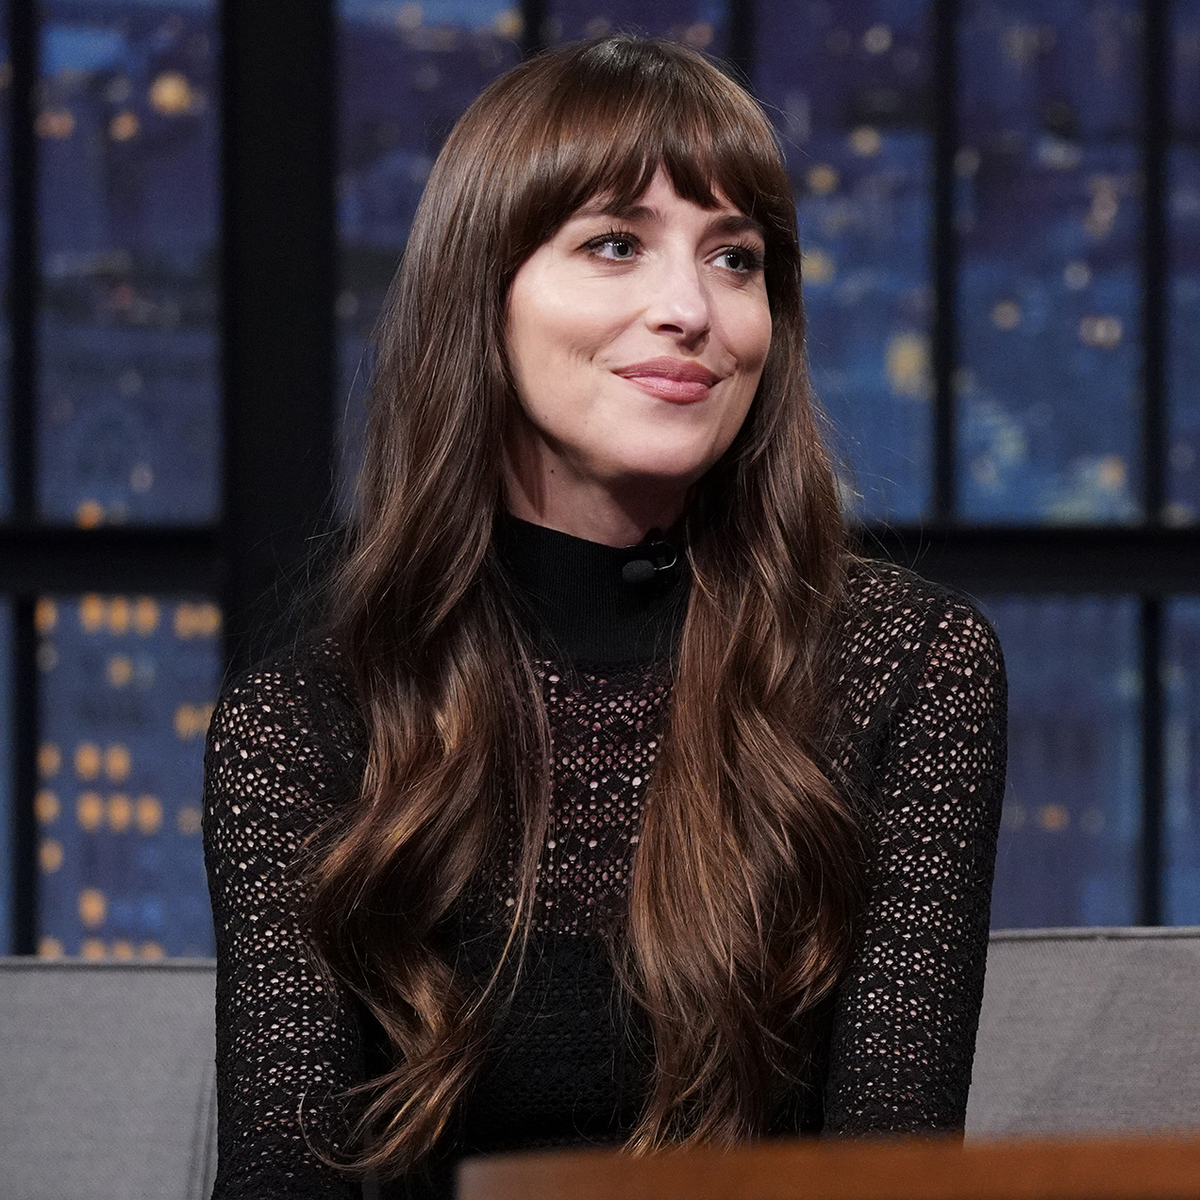 Why Dakota Johnson Calls Appearing on The Office “The Worst”